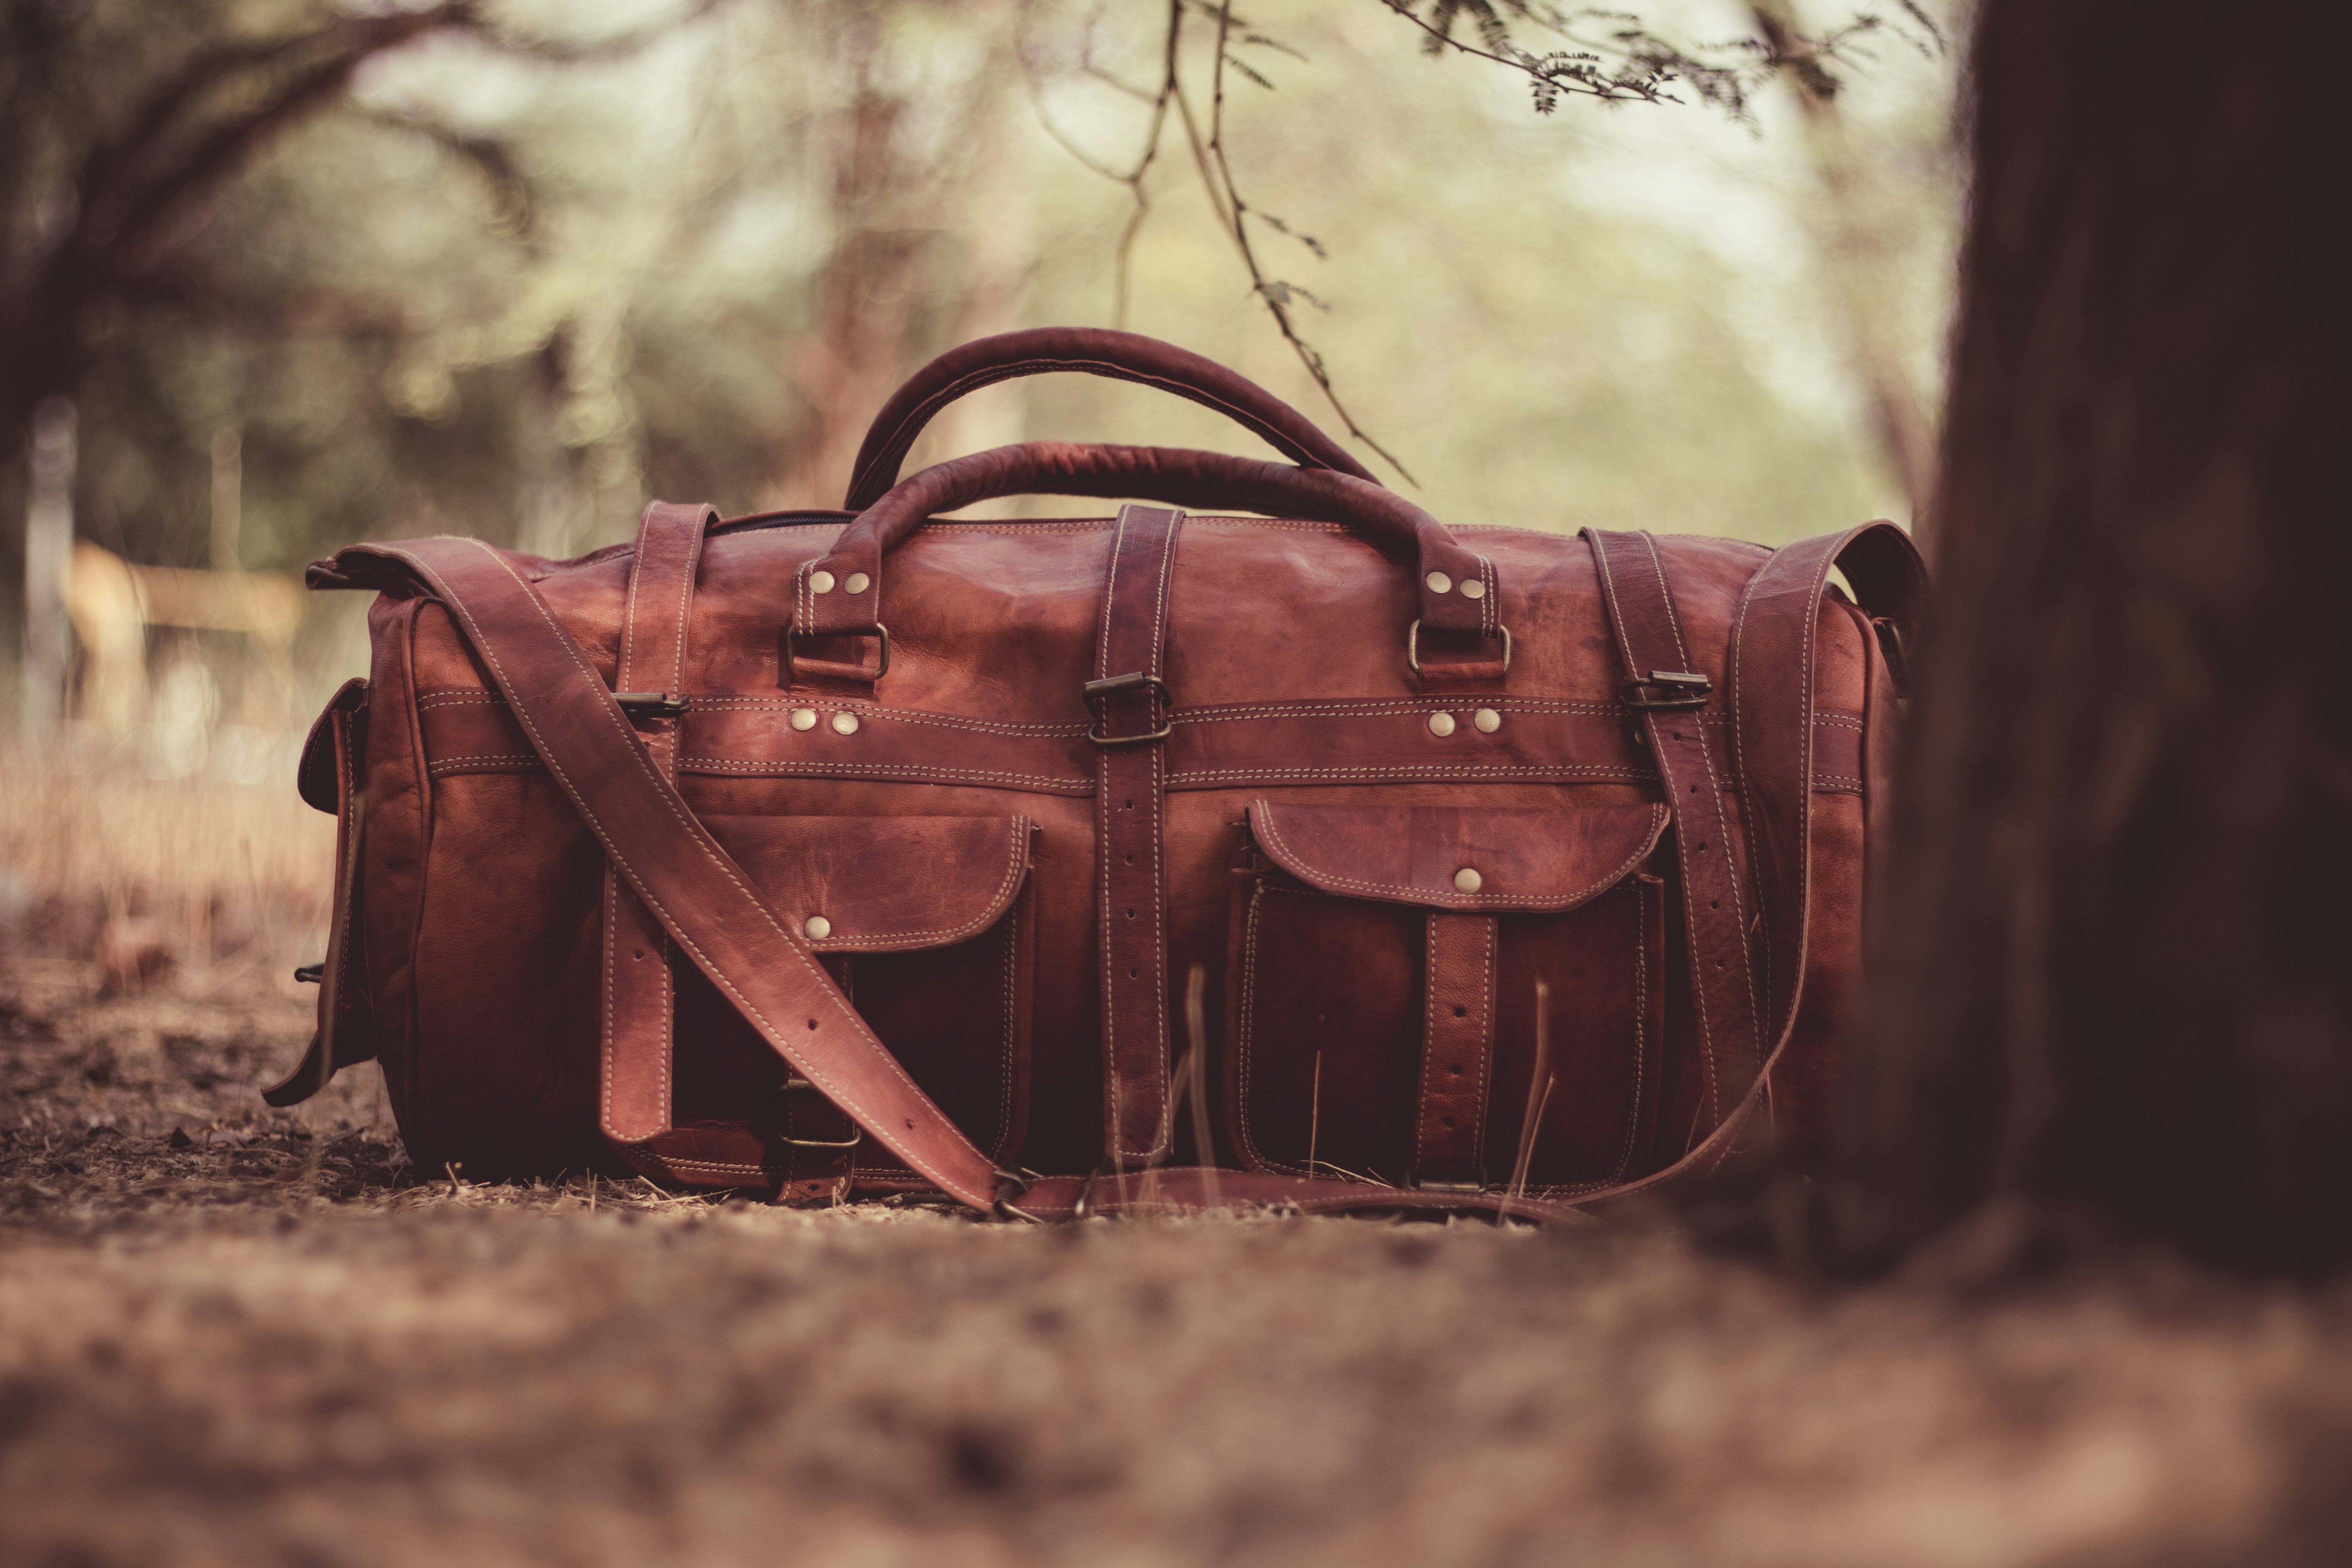 Leather duffel bag on the ground